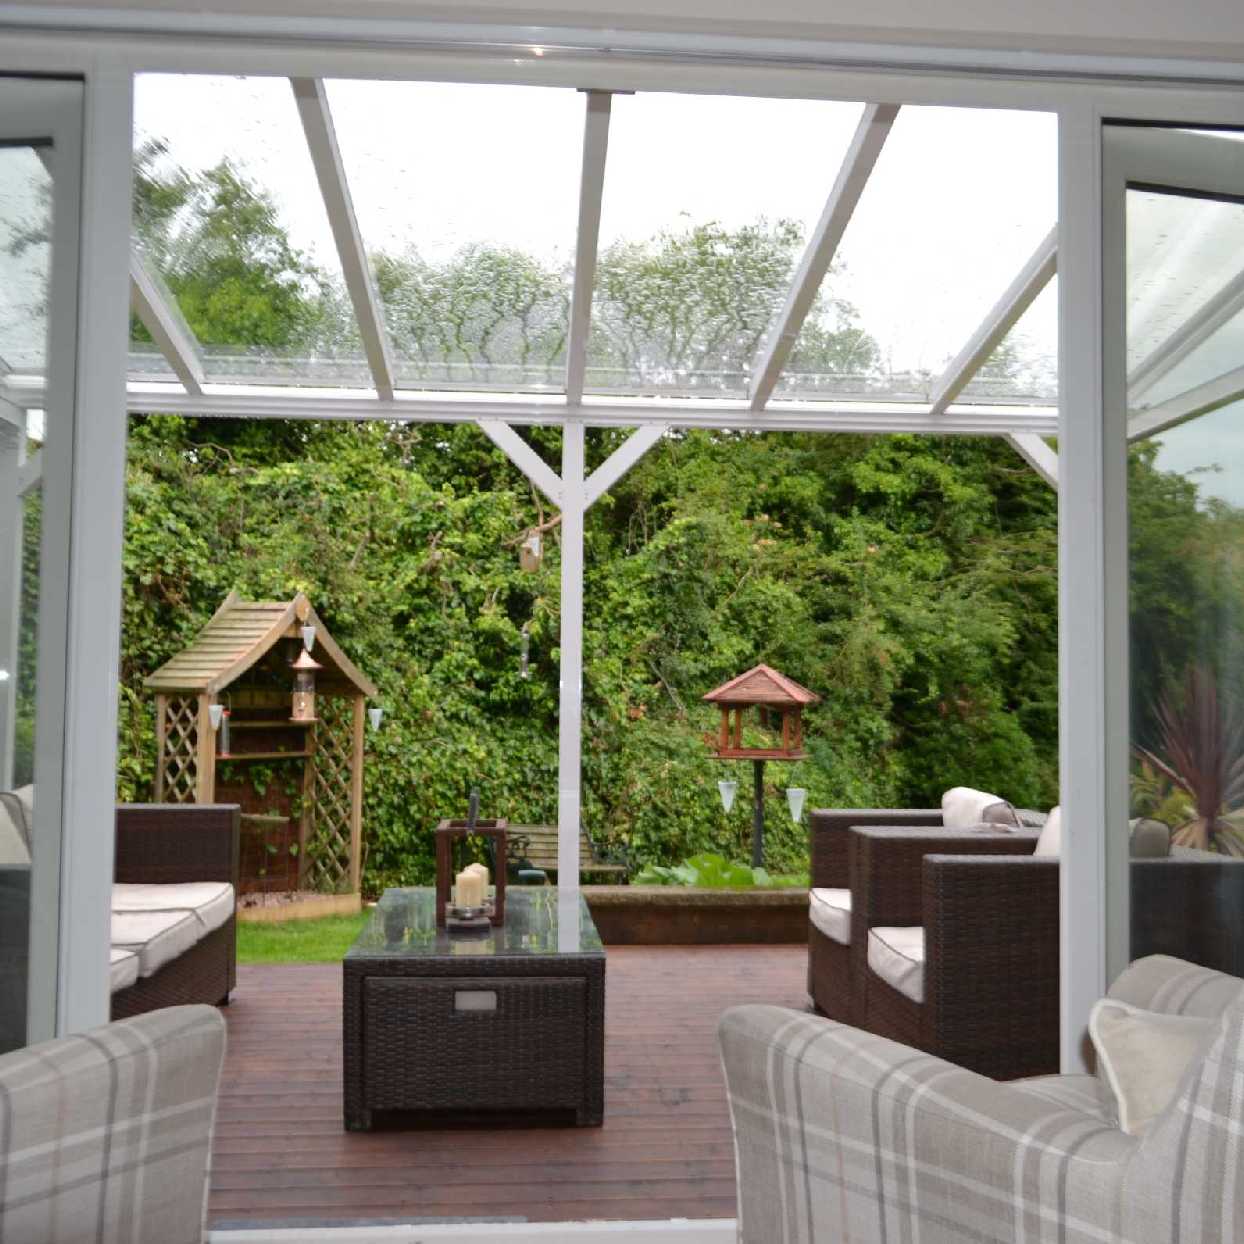 Great selection of Omega Smart Lean-To Canopy, White UNGLAZED for 6mm Glazing - 10.5m (W) x 2.5m (P), (5) Supporting Posts